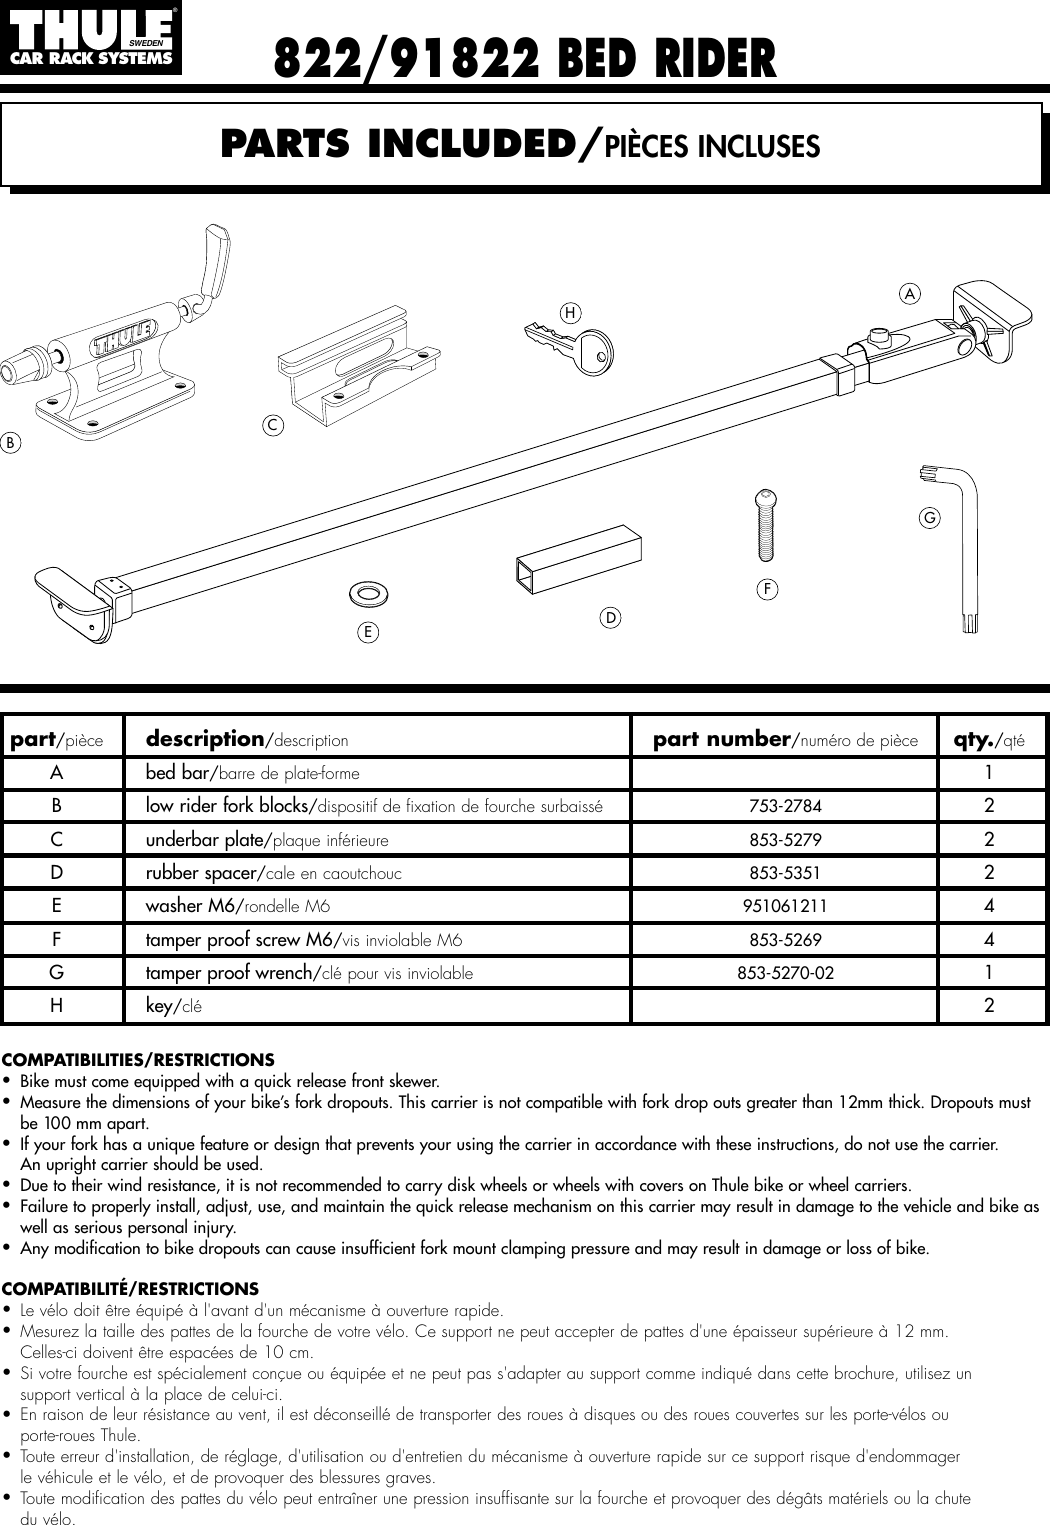 Page 1 of 7 - Thule Thule-Bed-Rider-822-91822-Users-Manual- 501-5326-02#822/91822 Bed Rider  Thule-bed-rider-822-91822-users-manual